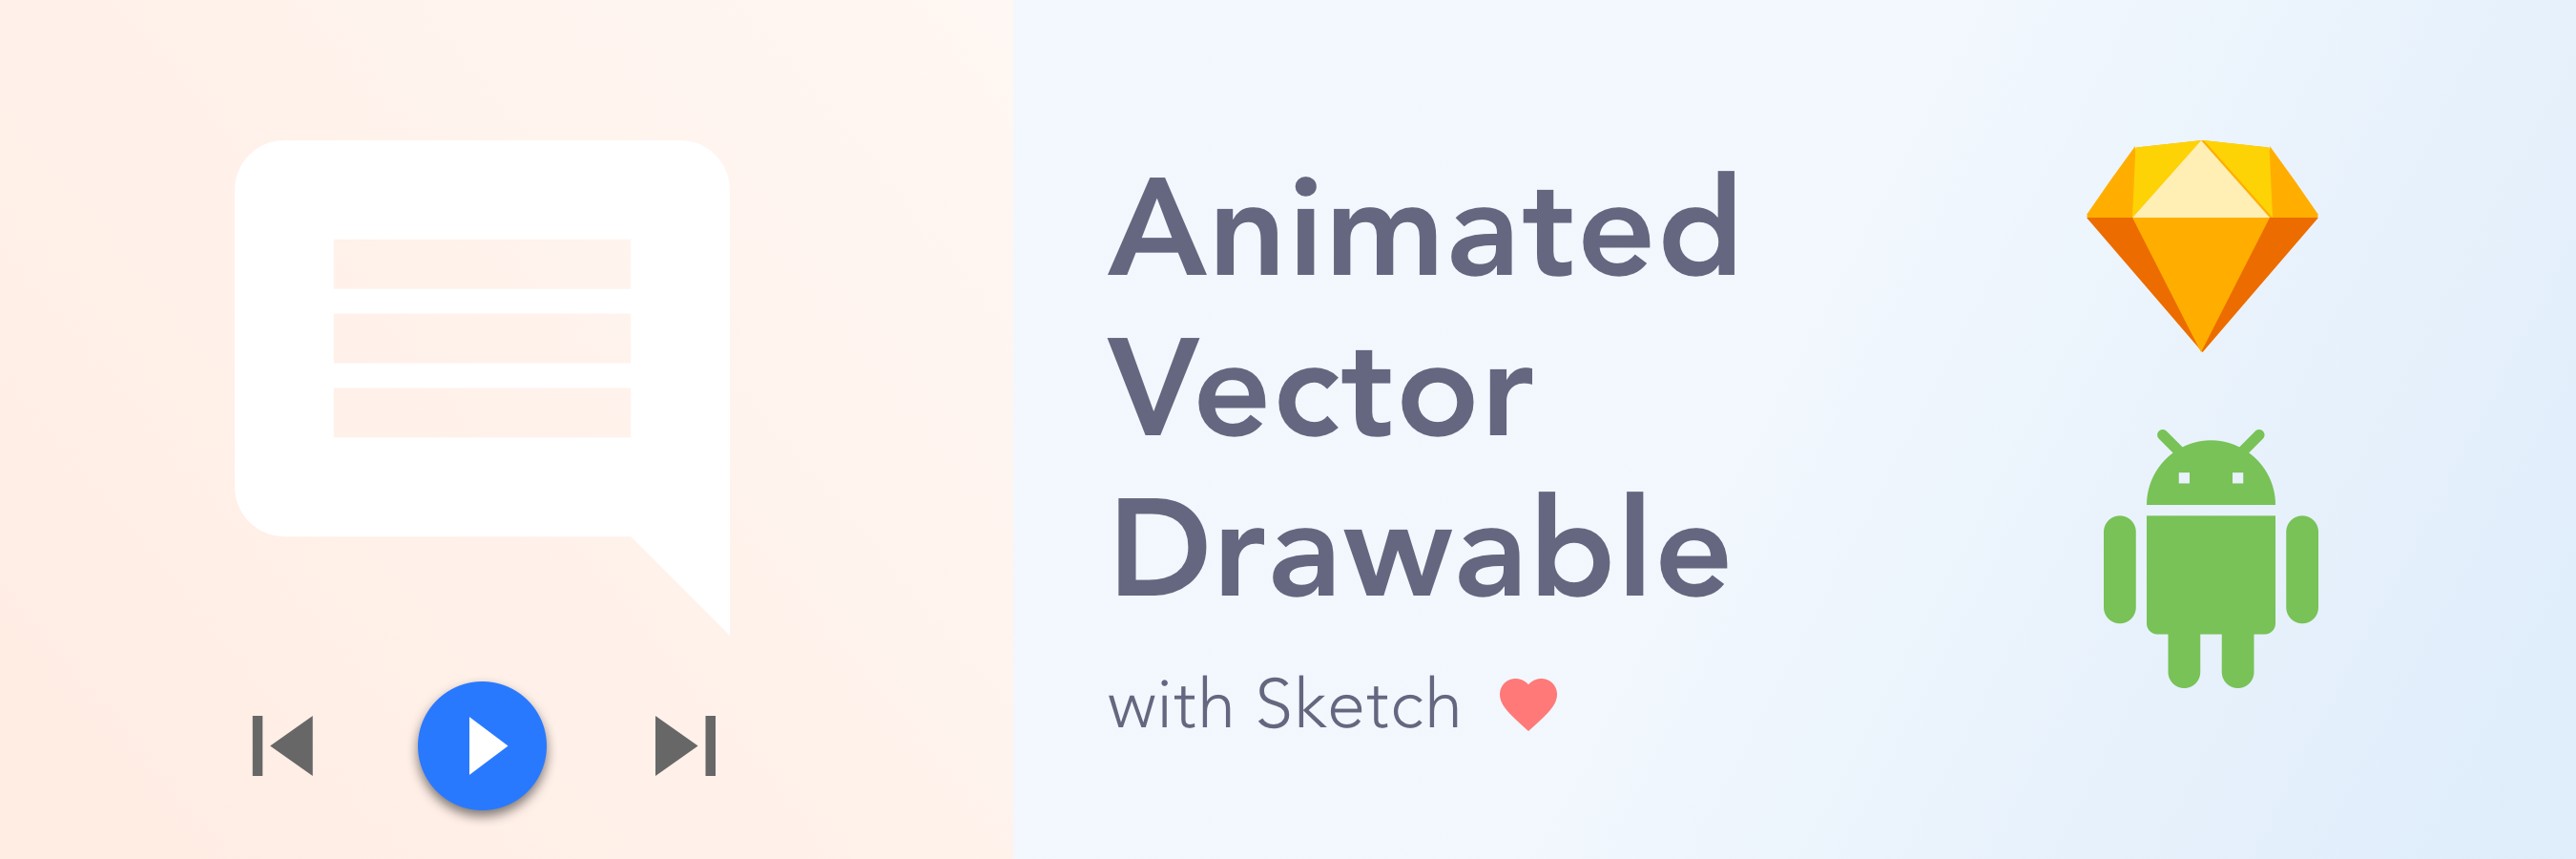 Sketch Animated Vector Drawable Proandroiddev